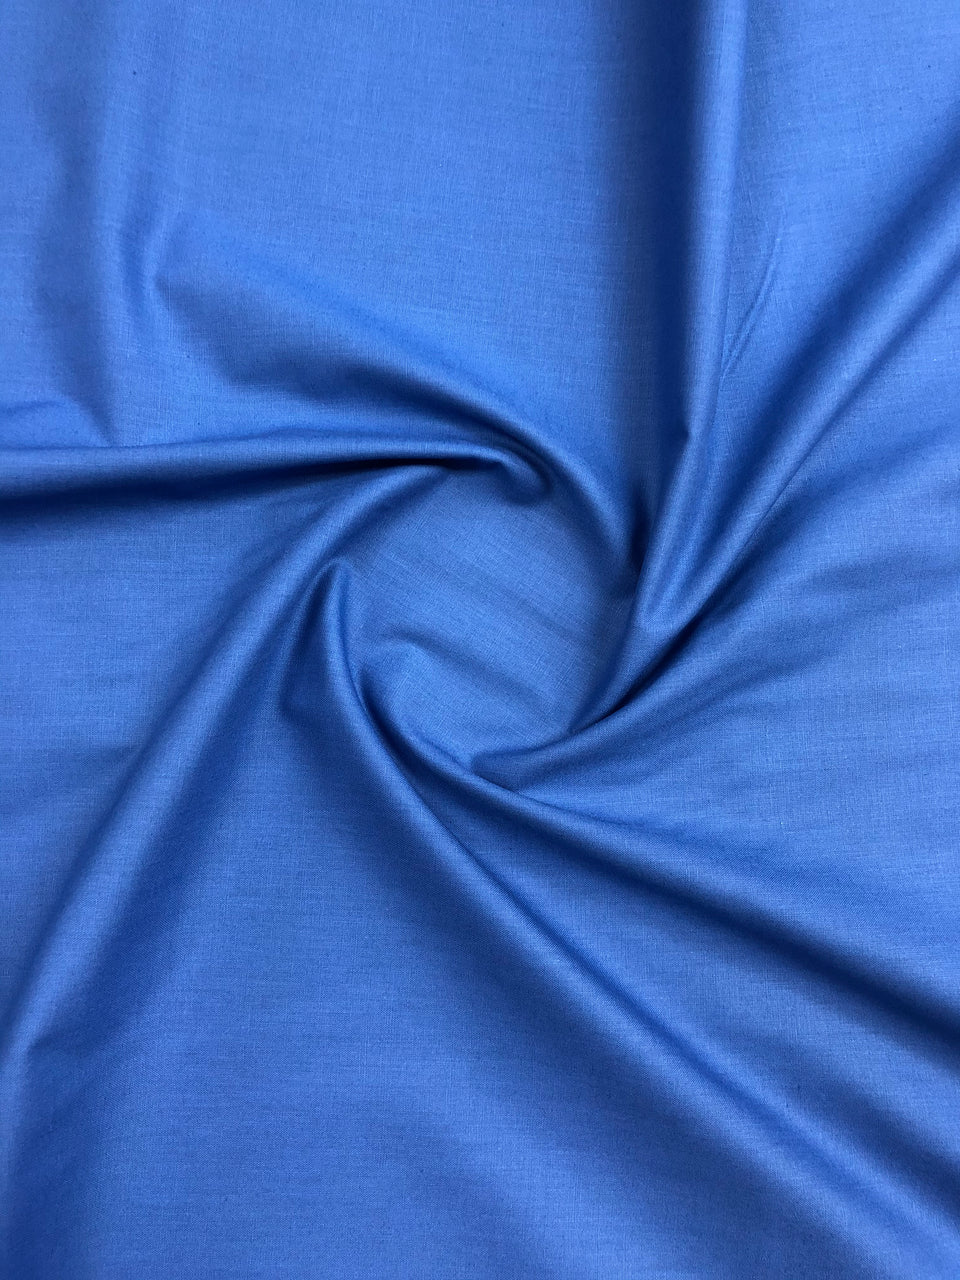 Royal Blue - Quilting Cotton